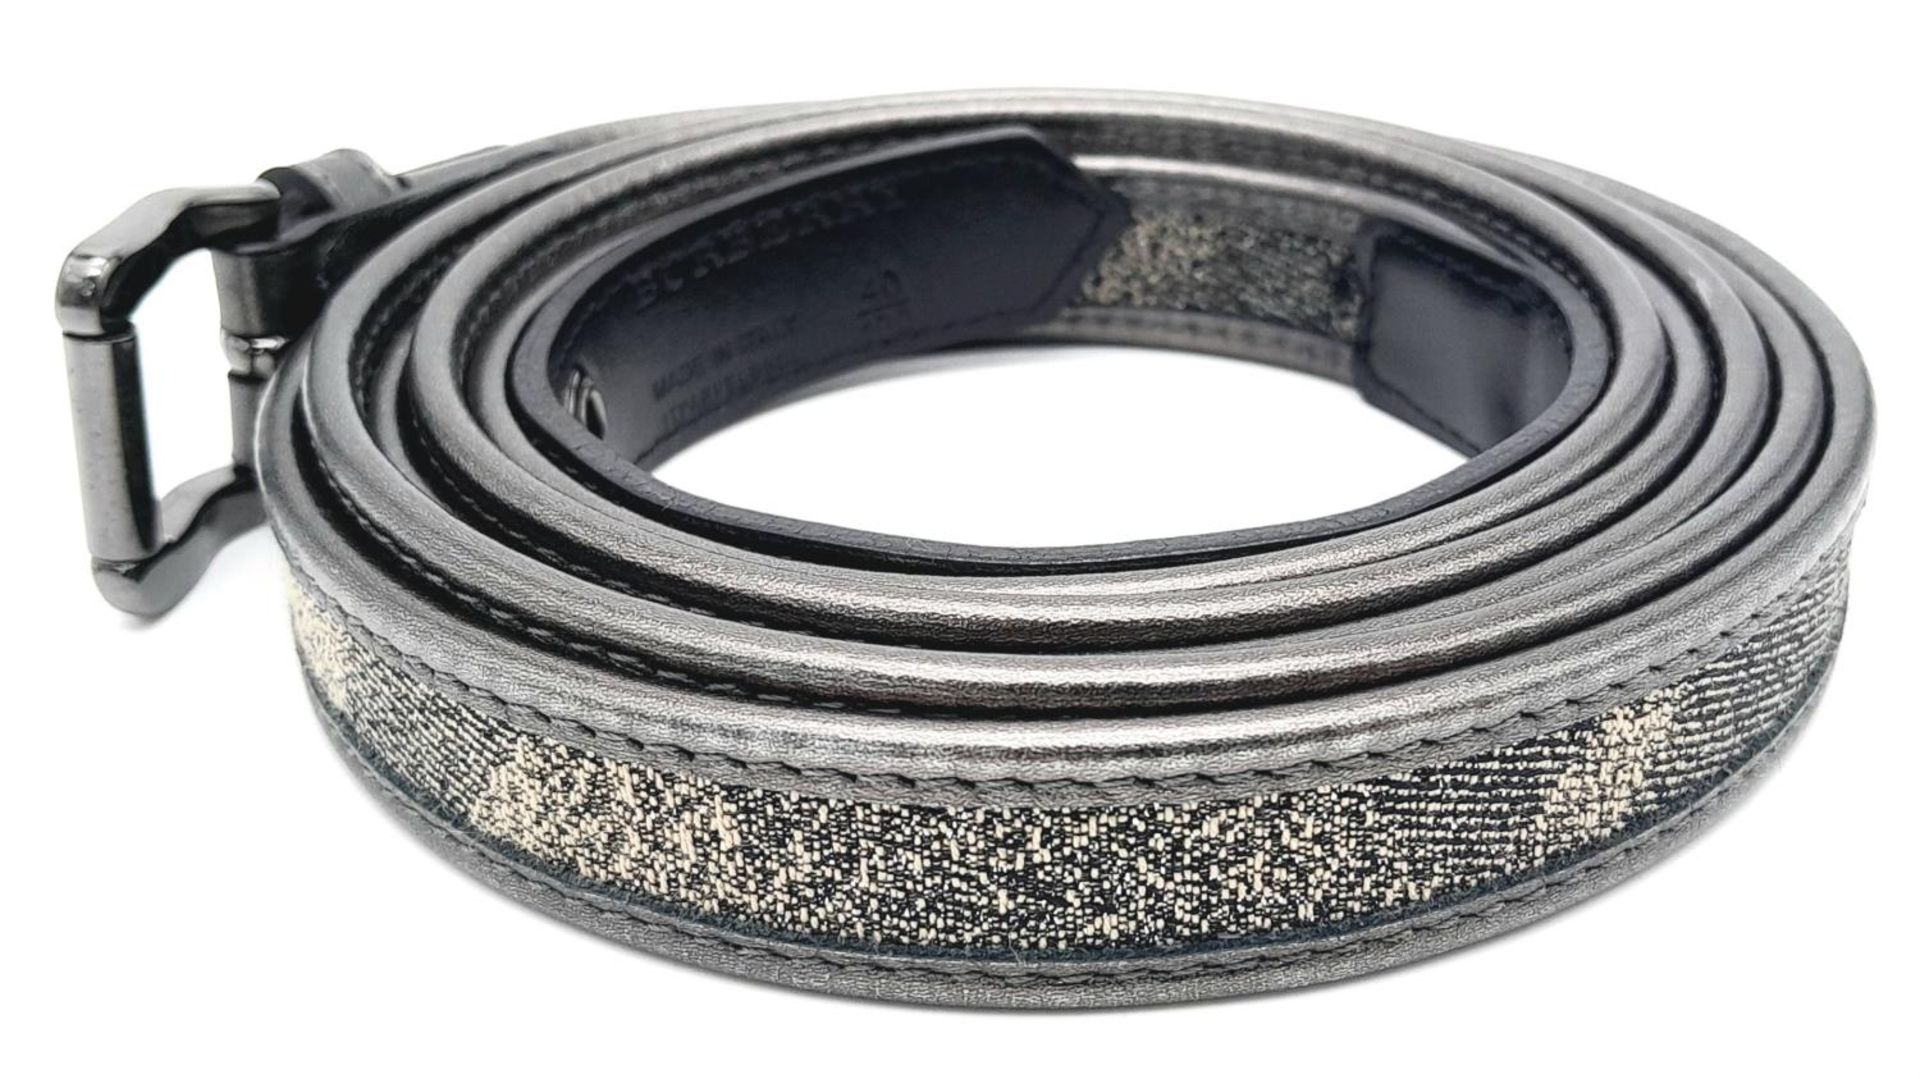 A Burberry Gun Metal Grey Shimmer Double Wrap Belt. Leather and textile with black-toned hardware. - Image 4 of 7